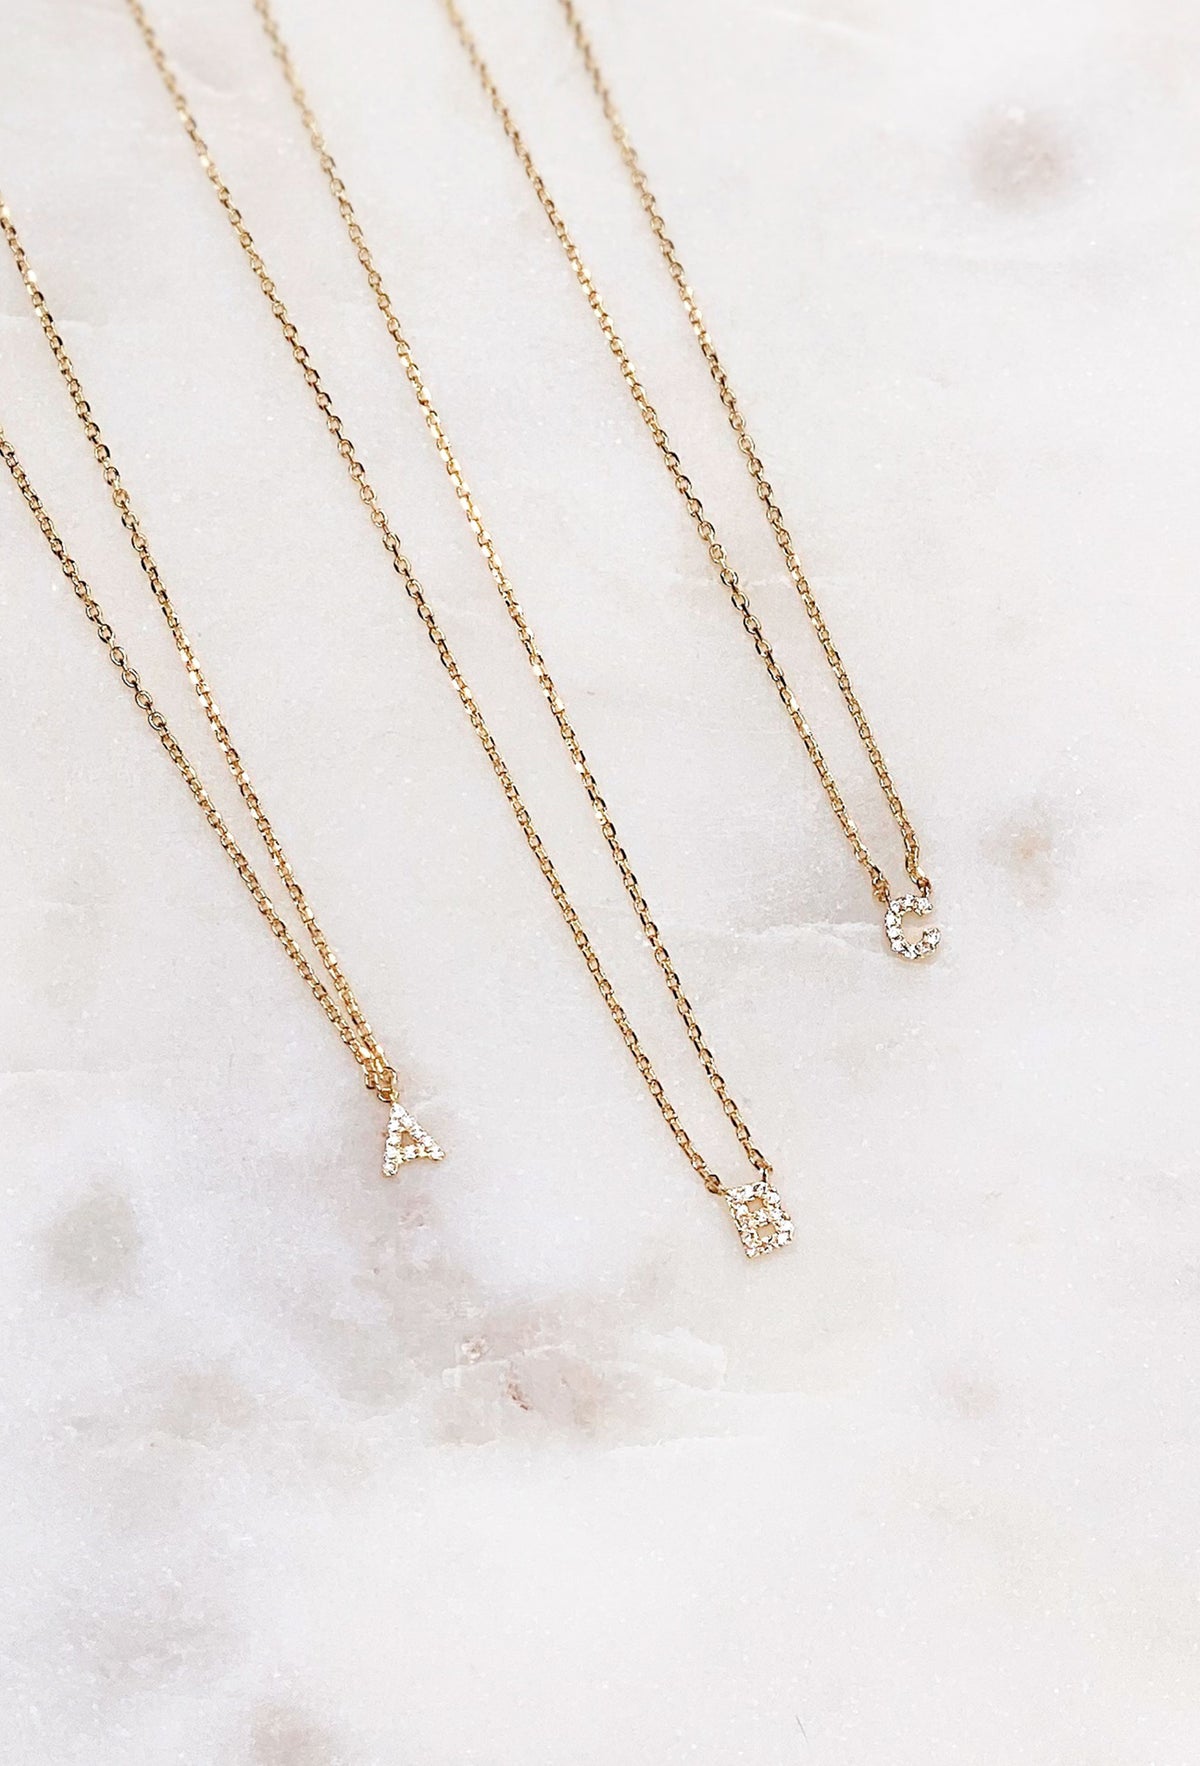 Mini Crystal Monogram Initial Necklace | Groovy's | Gold initial